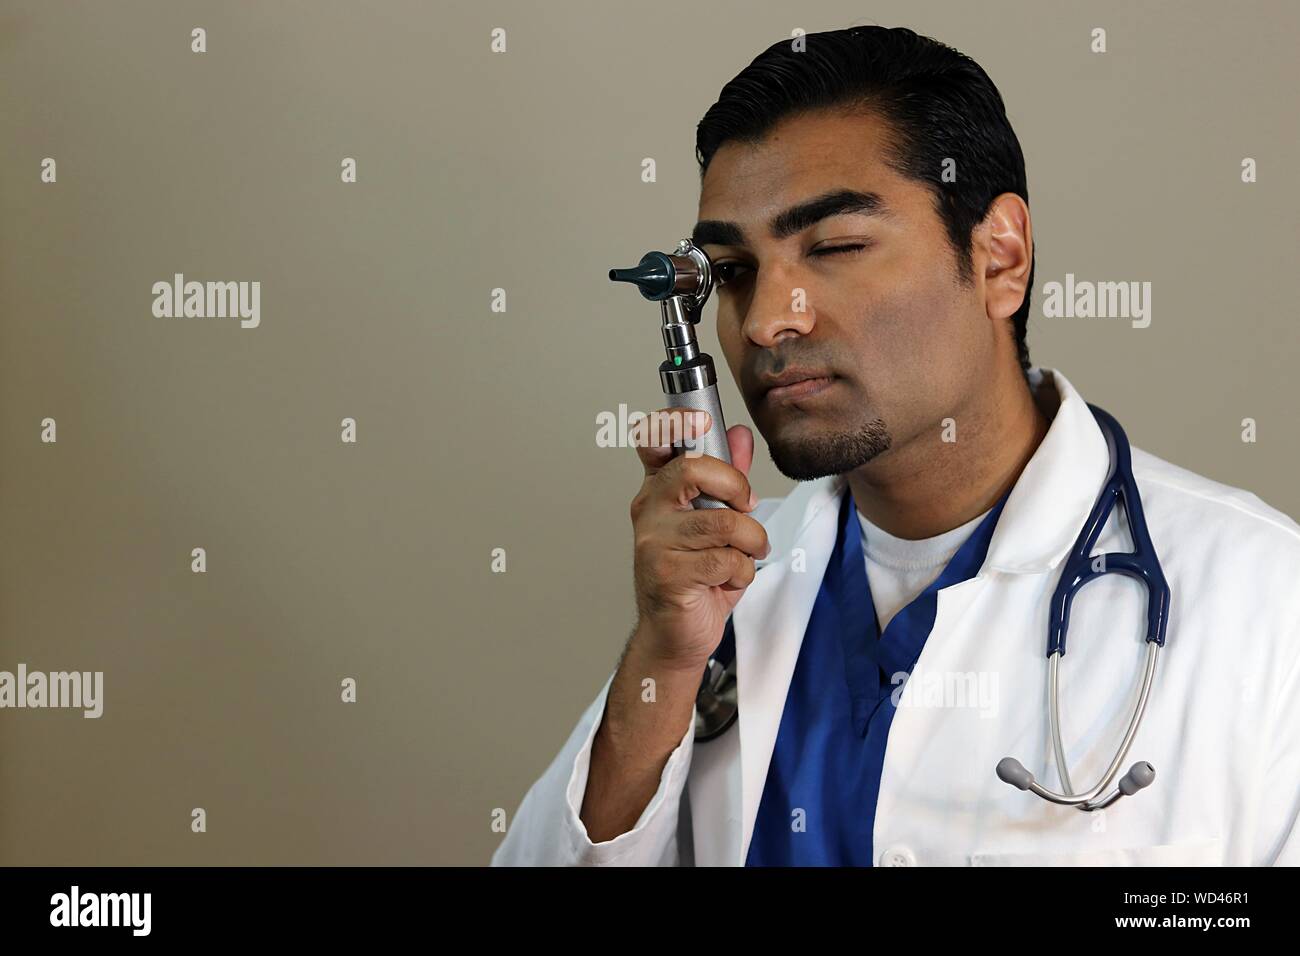 Close-up Of Doctor Holding Medical Instrument Against Gray Background Stock Photo